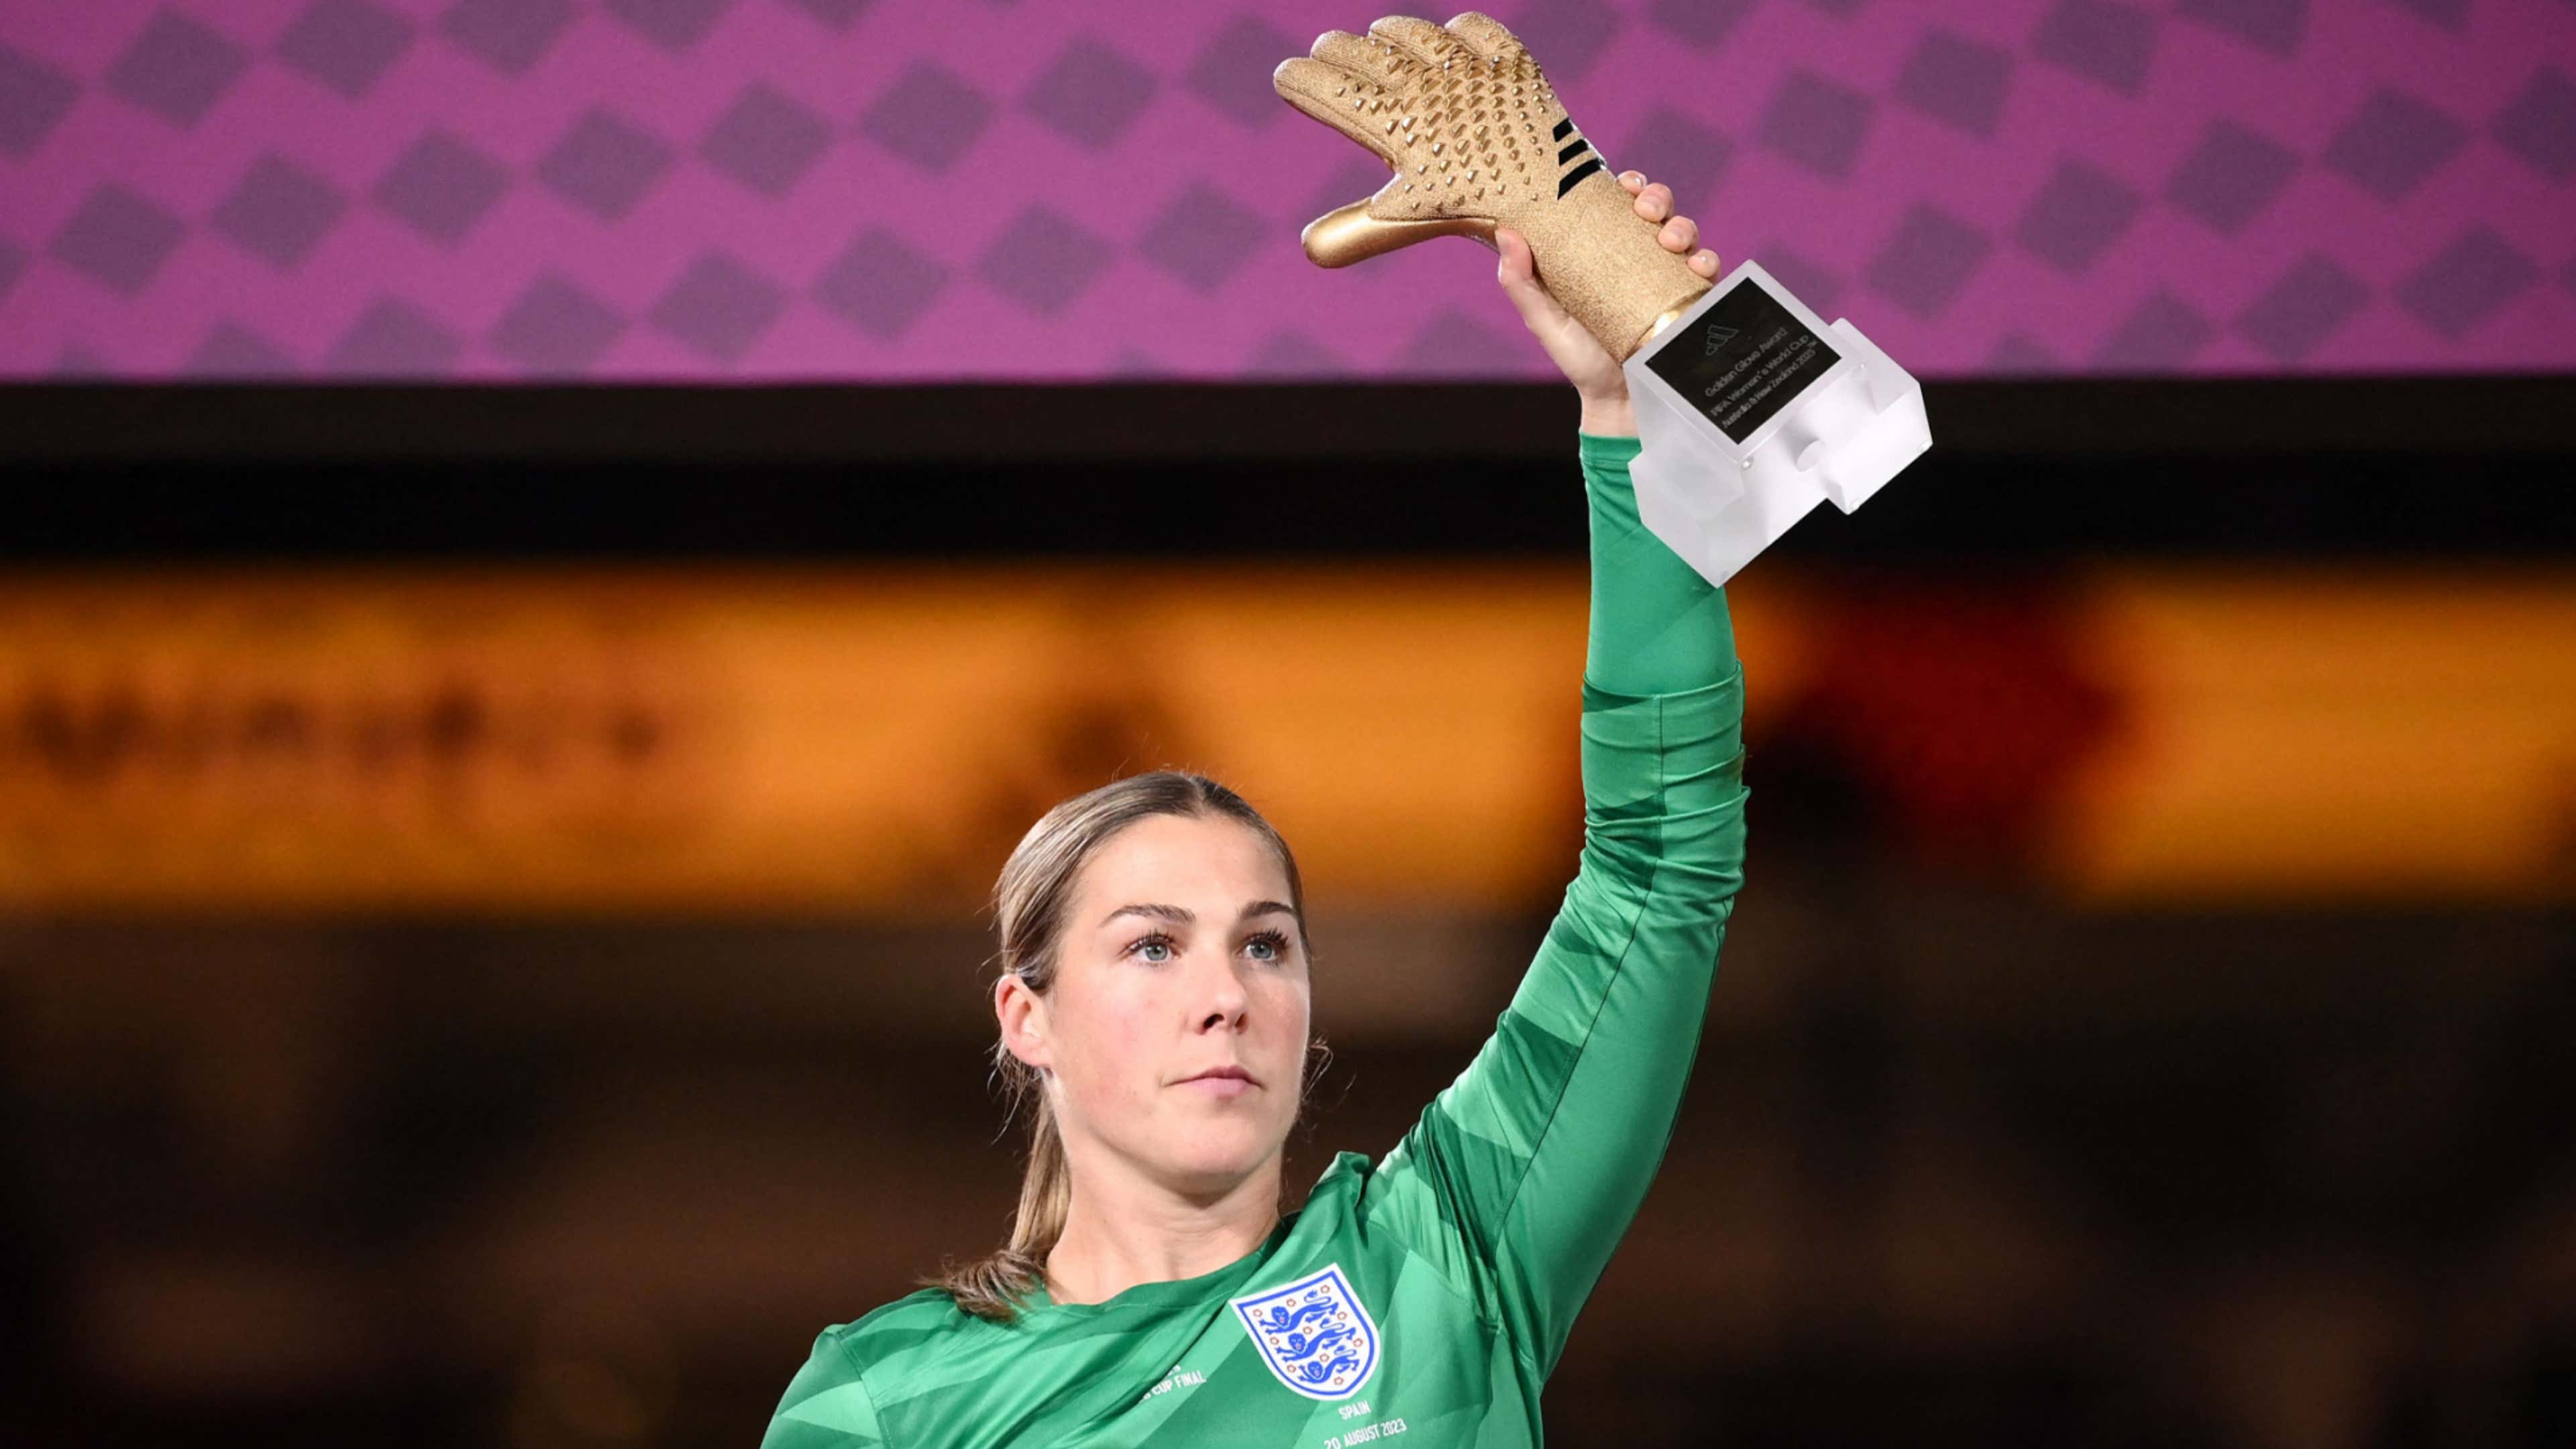 Is this an apology?' Mary Earps queries Nike statement on England